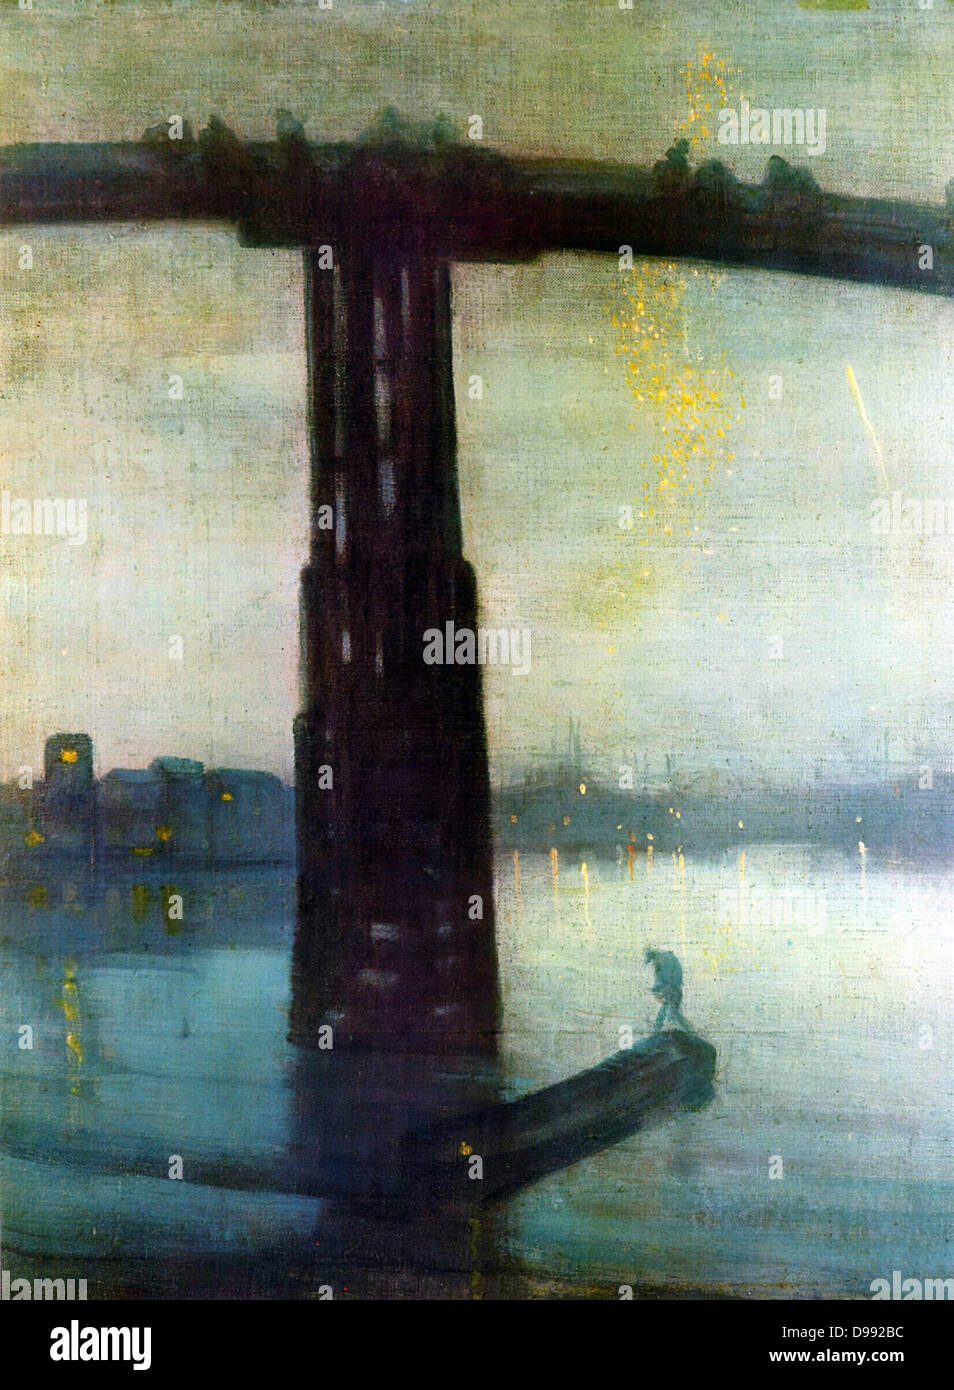 Nocturne: Blue and Gold - Old Battersea Bridge', 1872-1875. Oil on canvas. James Abbott McNeill Whistler (1834-1903) American painter based in Britain. Night Water Reflection River Thames London England Transport Barge Stock Photo